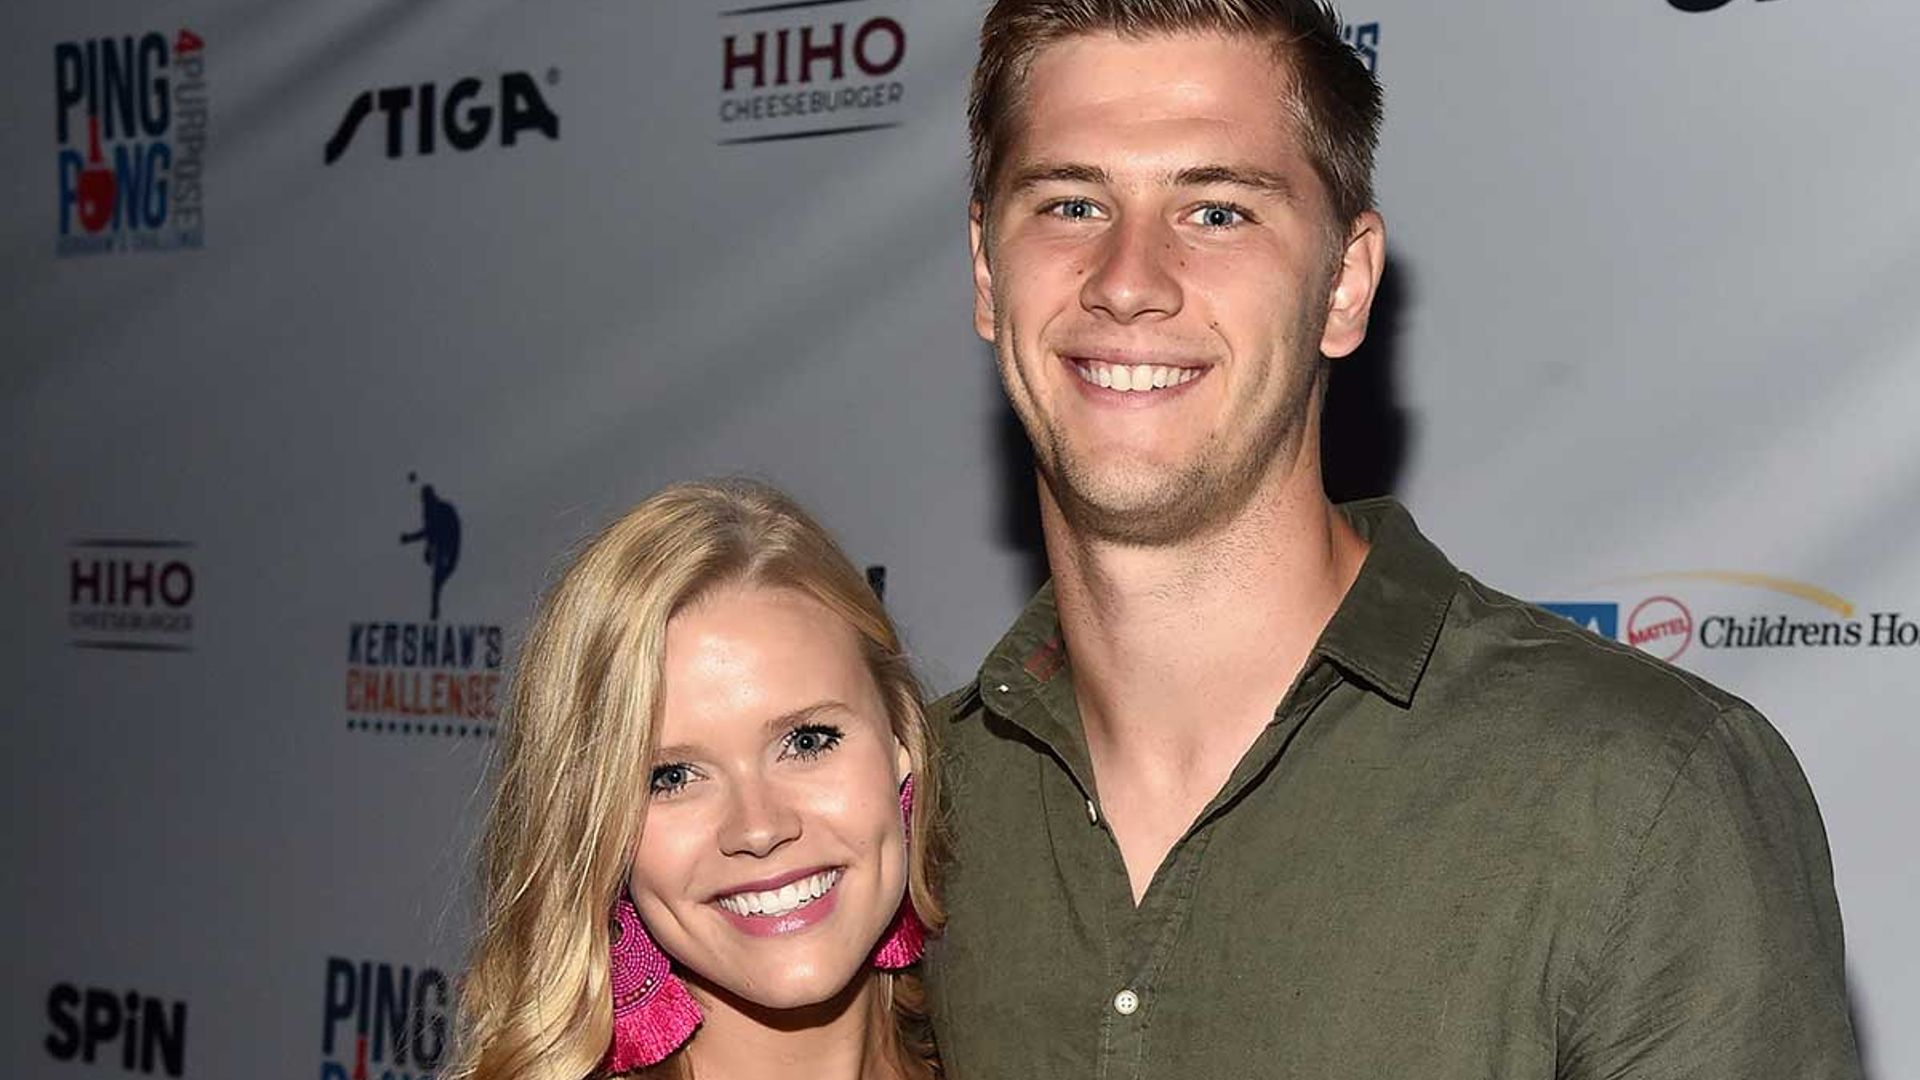 World Cup USA: Who is Walker Zimmerman's wife? Inside their movie